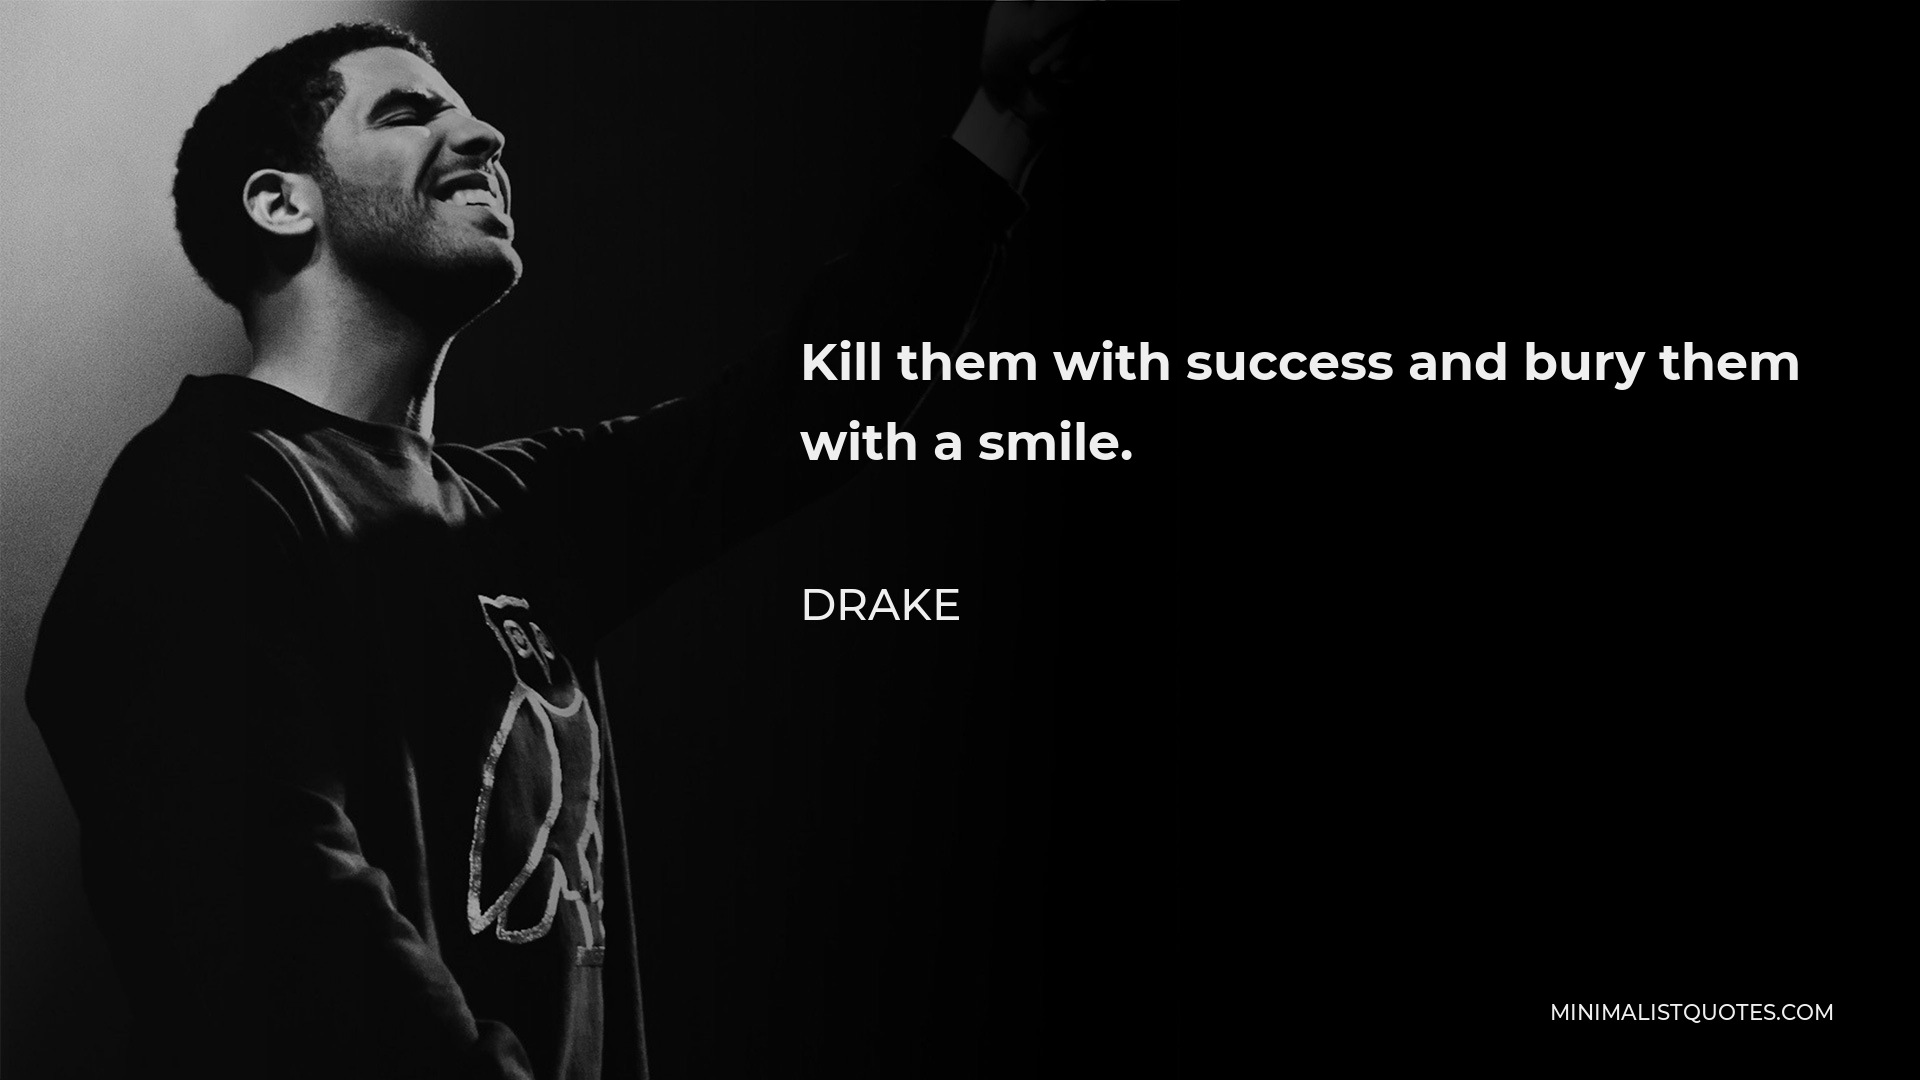 Drake Quote - Kill them with success and bury them with a smile.